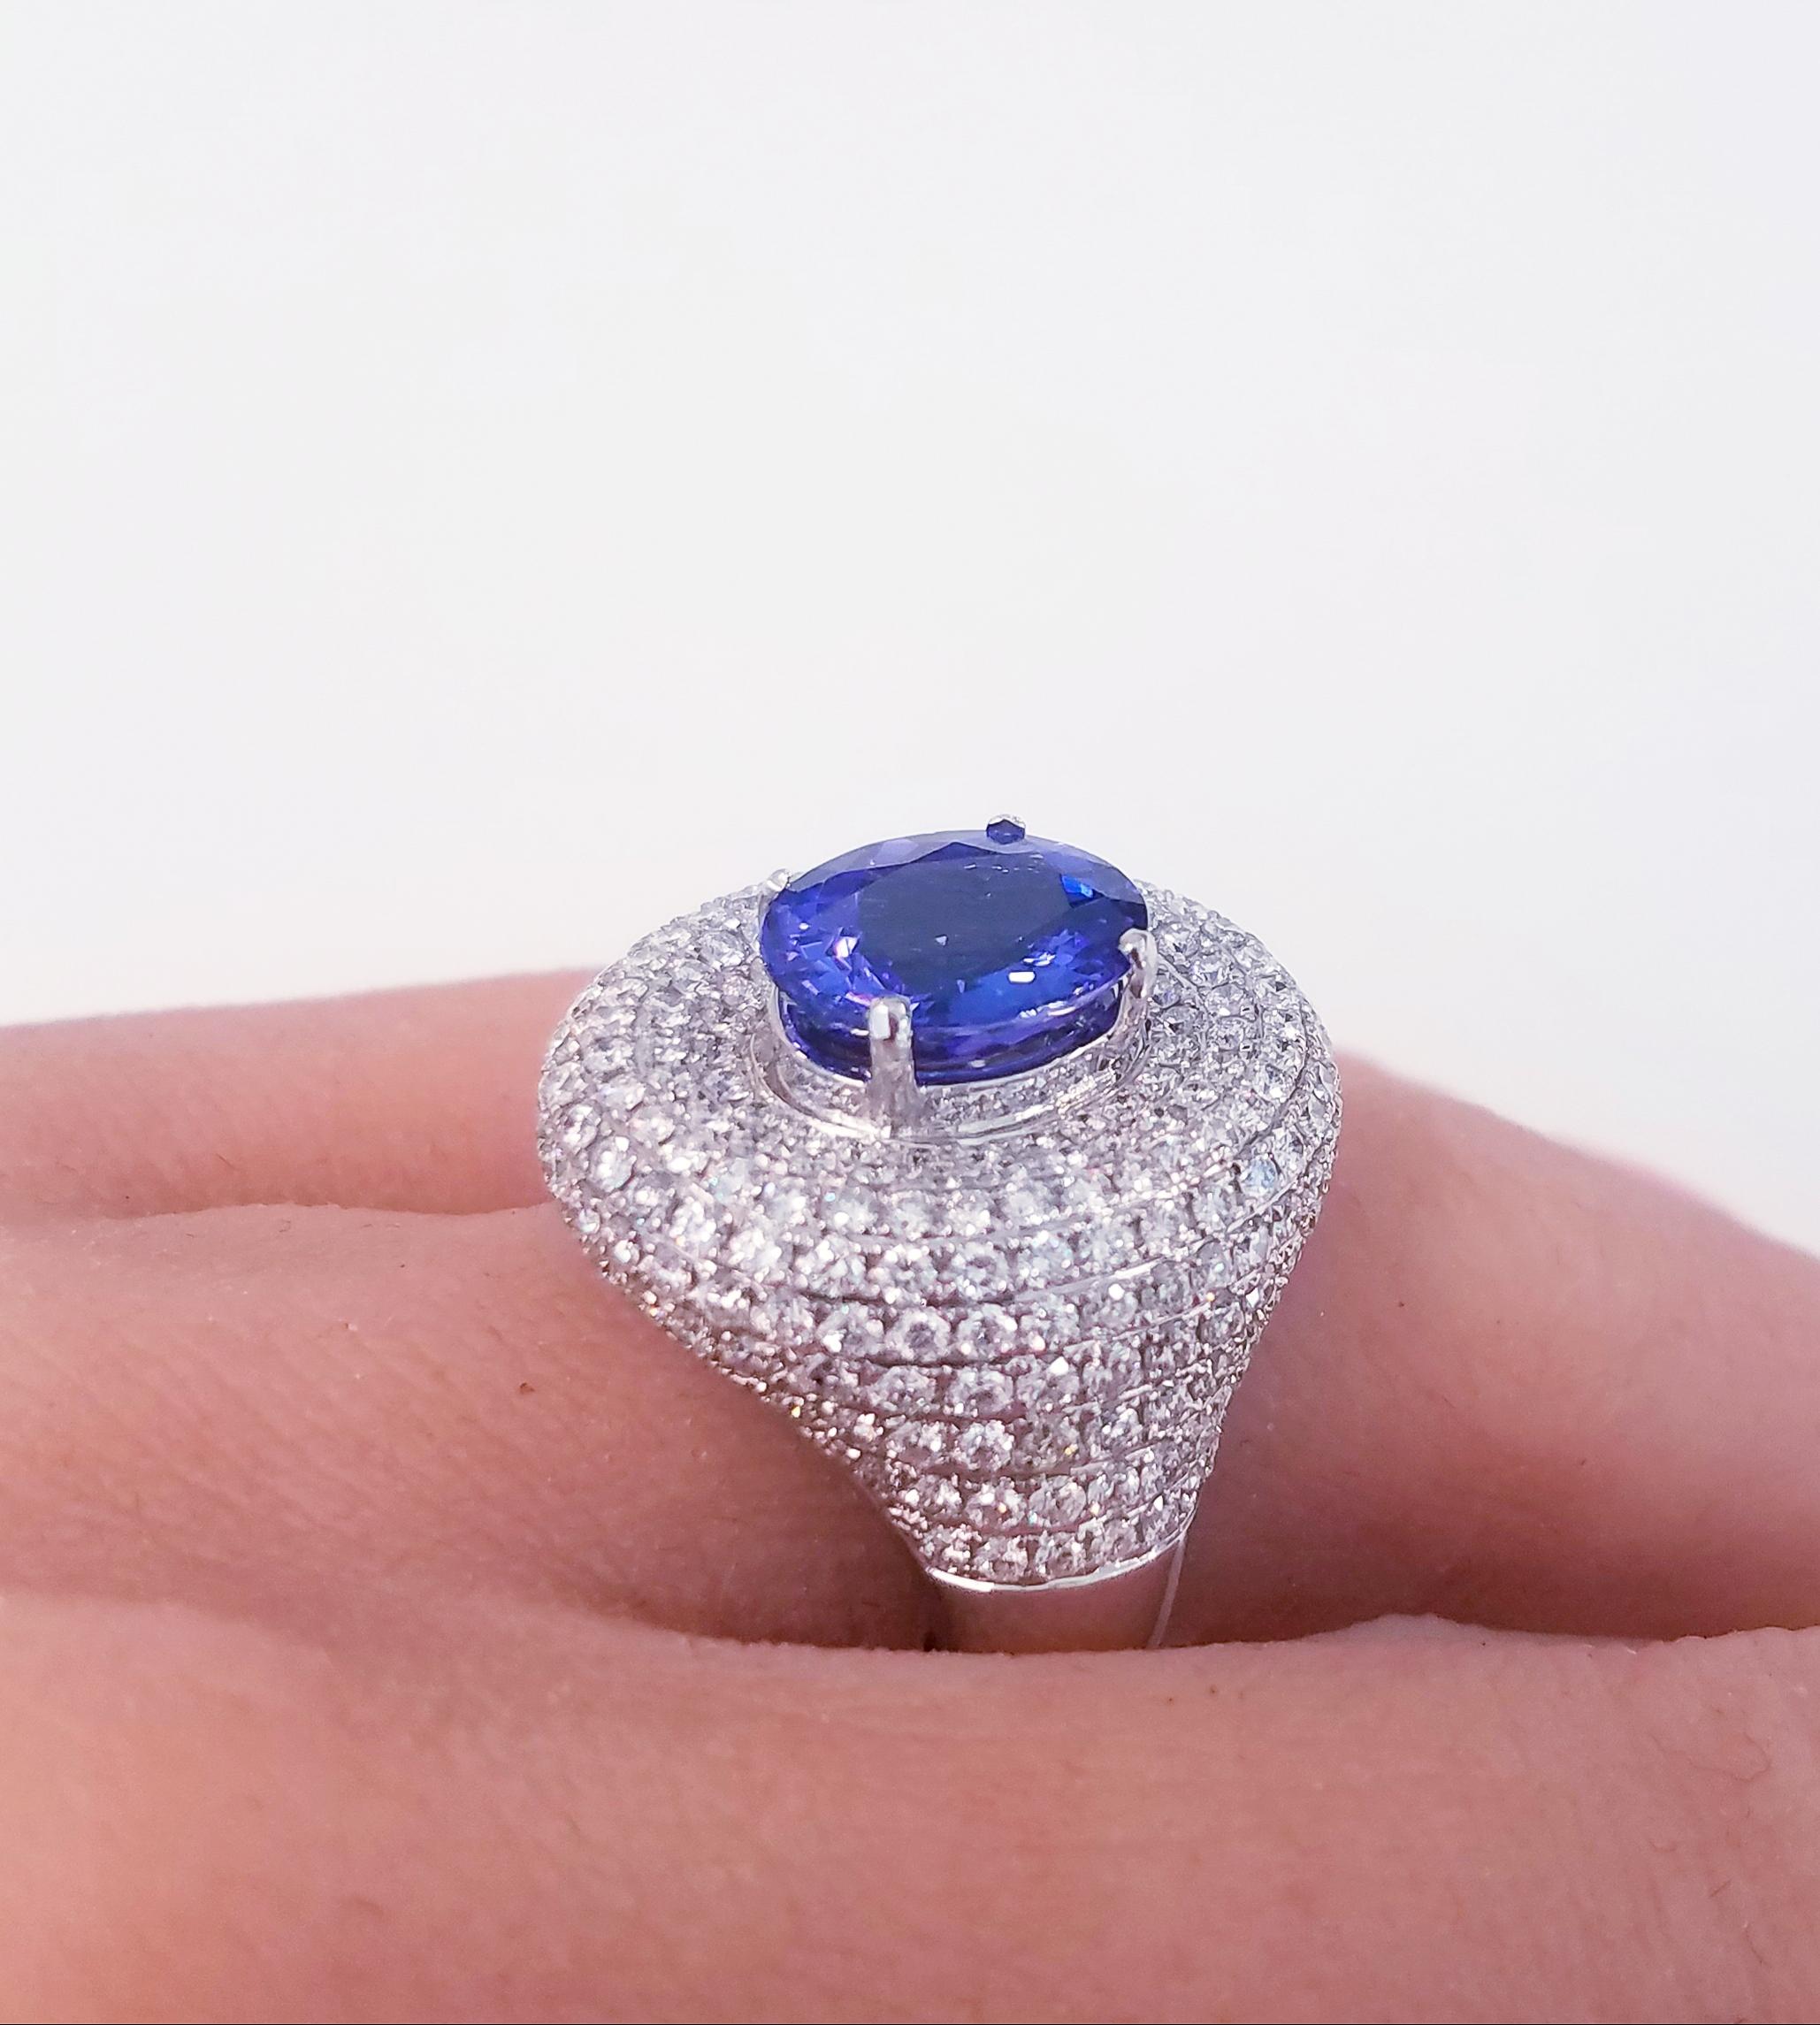 Oval Cut 4.10 Carat Oval Tanzanite and Diamond Cocktail Ring in 18 Karat White Gold